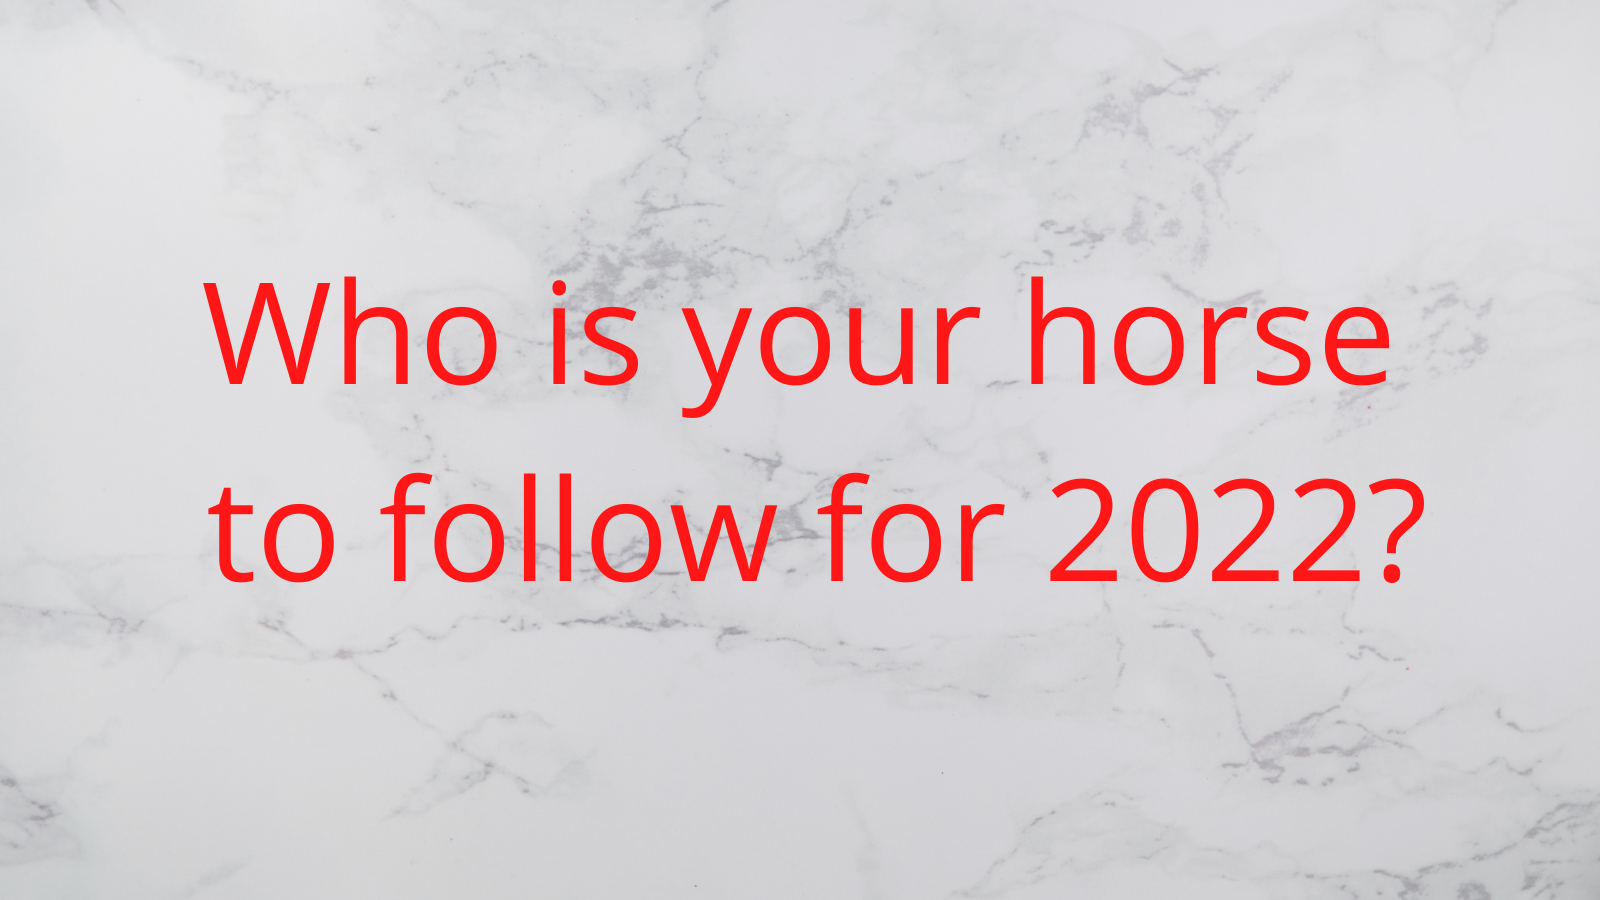 Who is your horse to follow for 2022